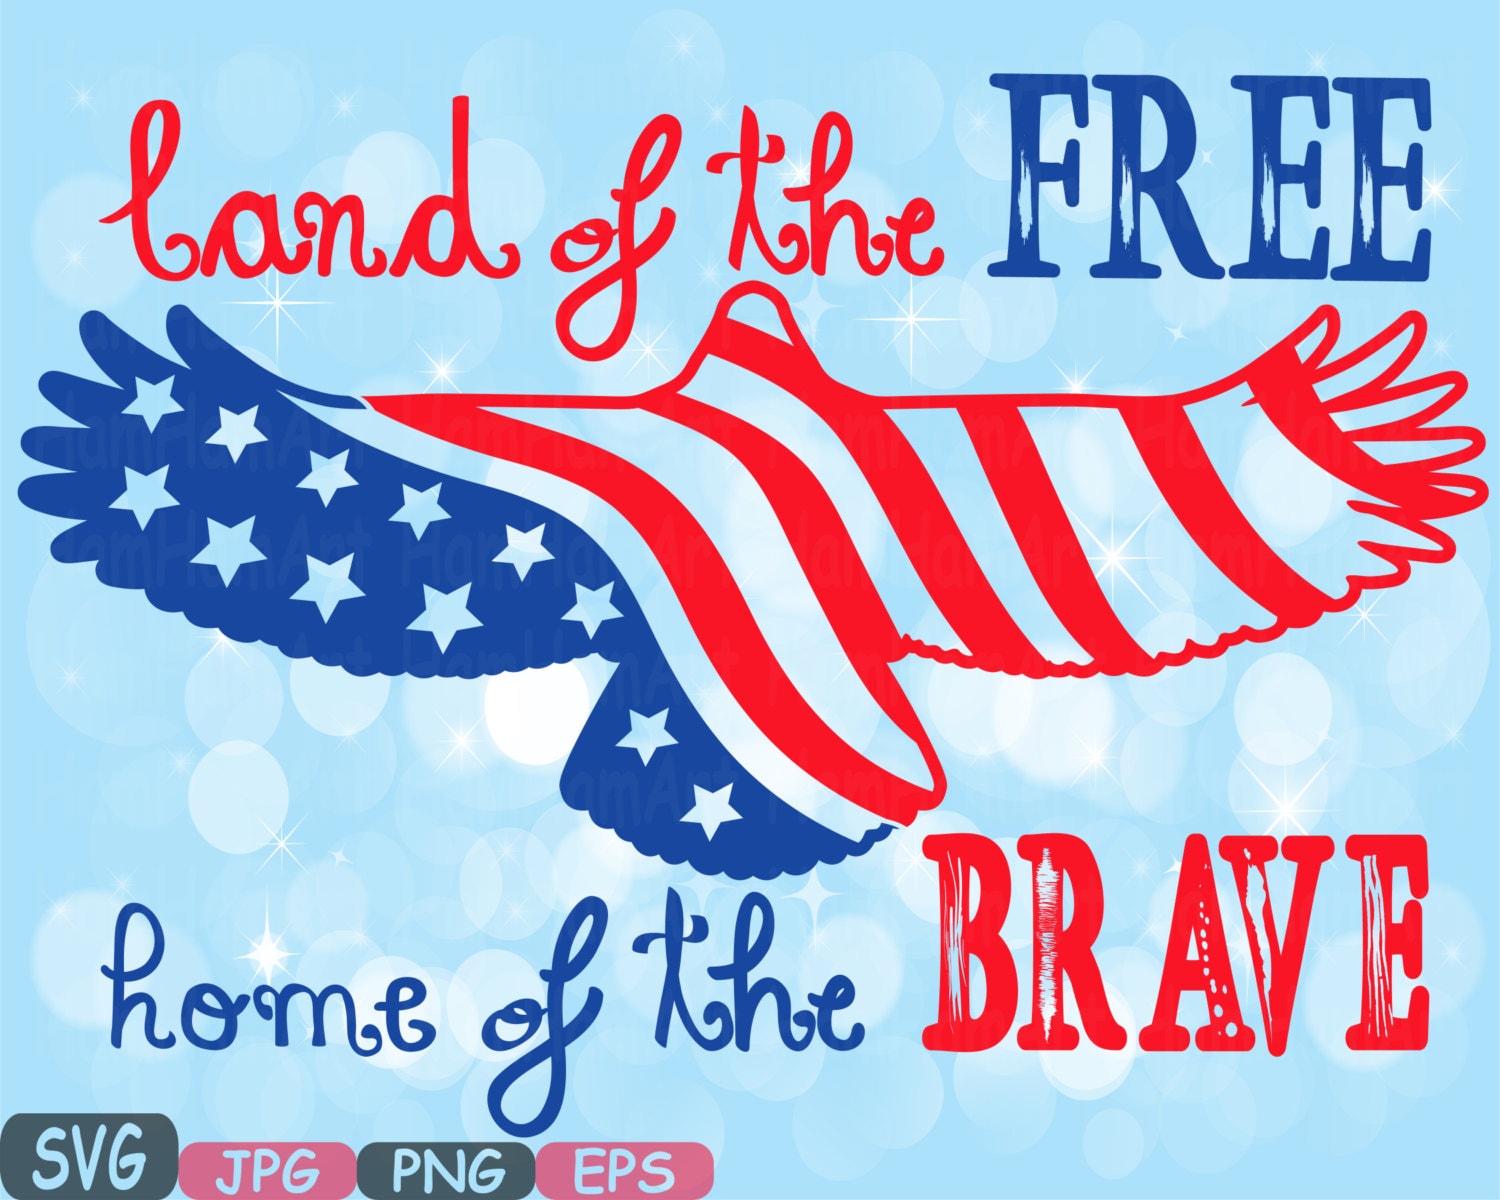 Free Free 183 Svg Home Of The Free Because Of The Brave SVG PNG EPS DXF File